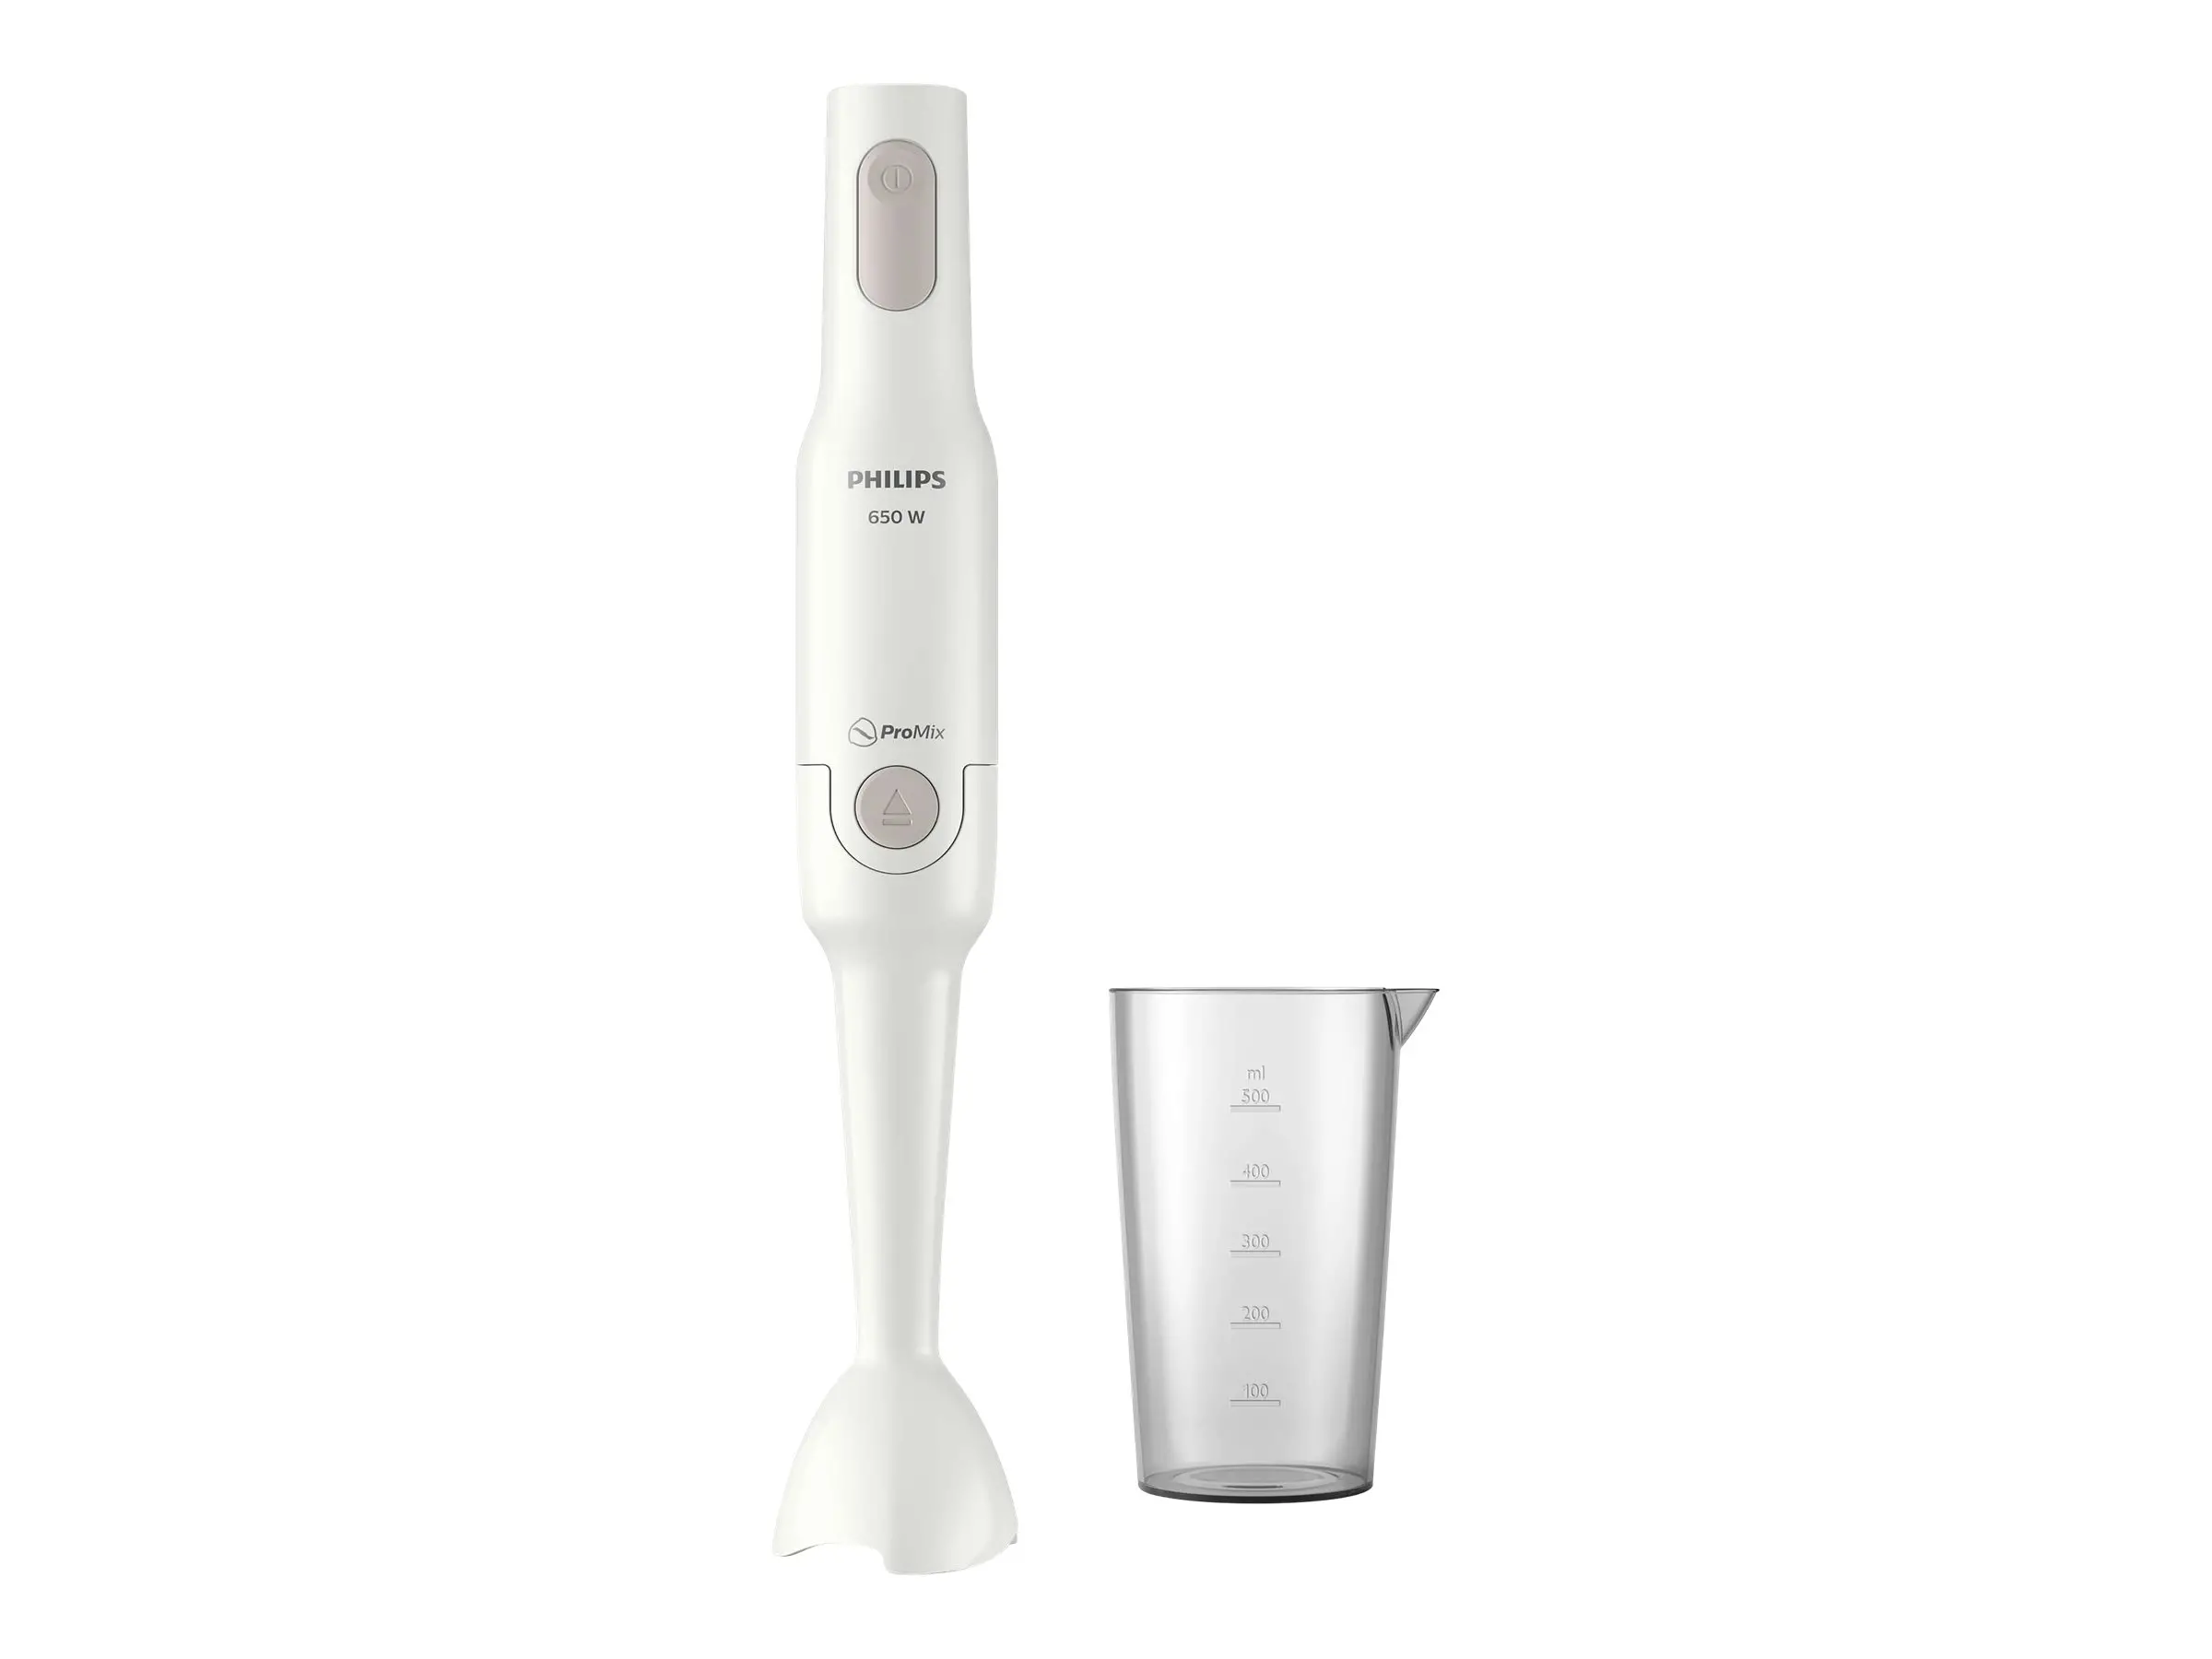 PHILIPS Hand blender Viva Collection ProMix 650W - image 1